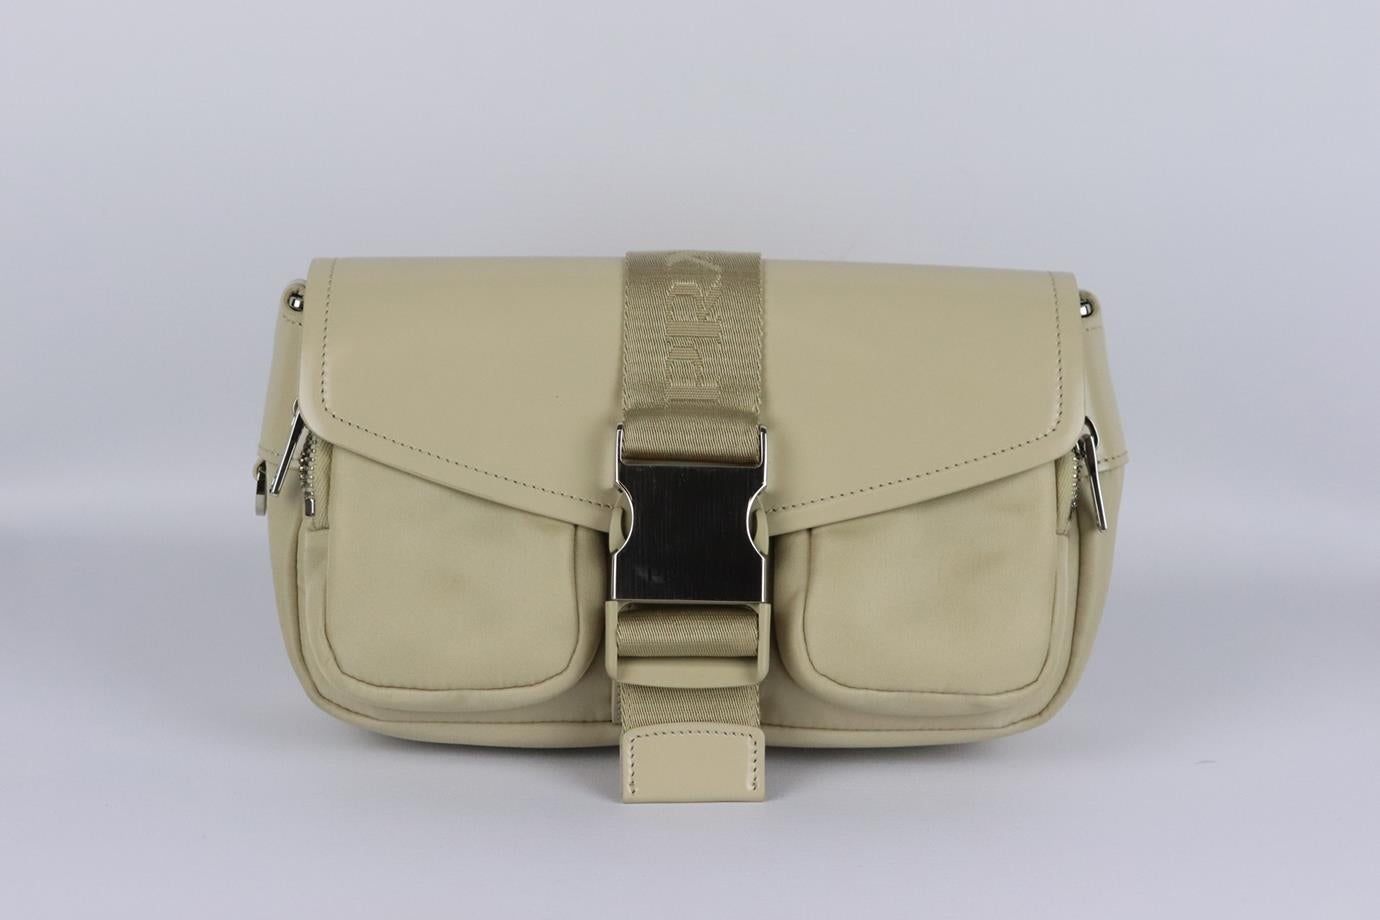 Prada Pocket leather and nylon shoulder bag. Beige. Buckle fastening at front. Does not come with dustbag or box. Height: 6.4 in. Width: 2 in. Depth: 5 in. Strap Drop: 34 in. Very good condition - Barely used. Light scratching to hardware; see